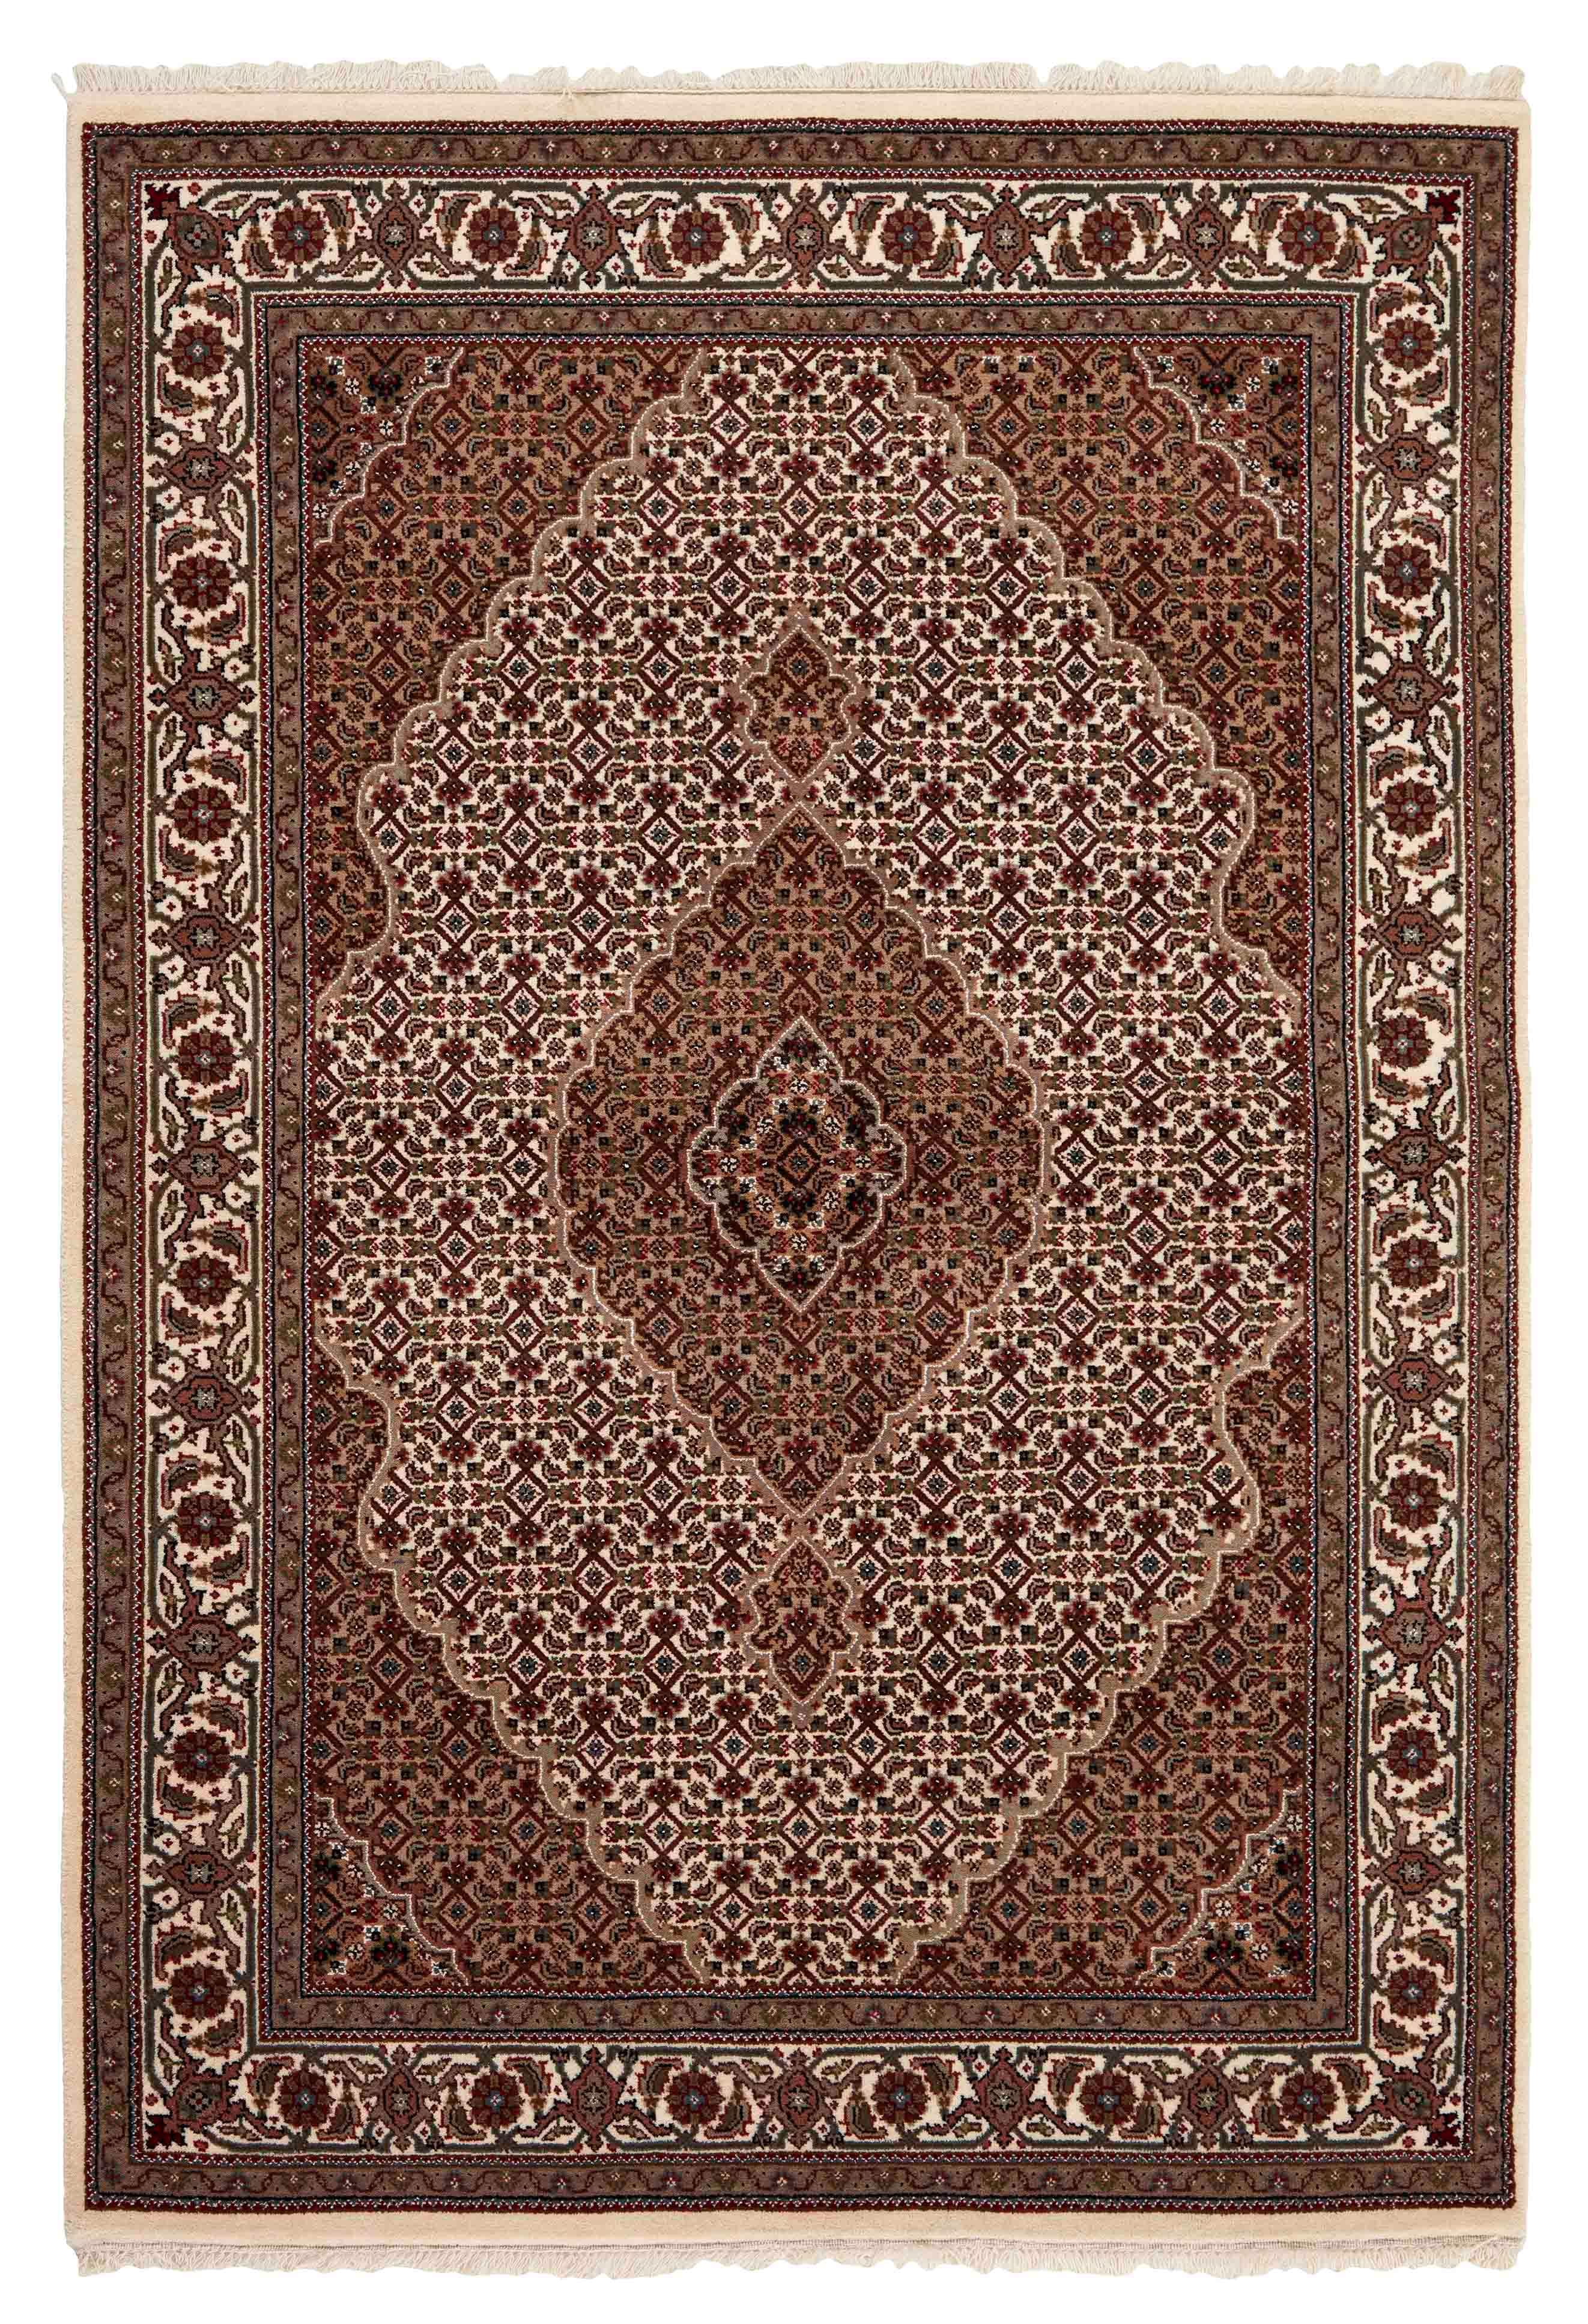 Authentic Oriental rug with traditional geometric and floral design in beige, blue, green and black